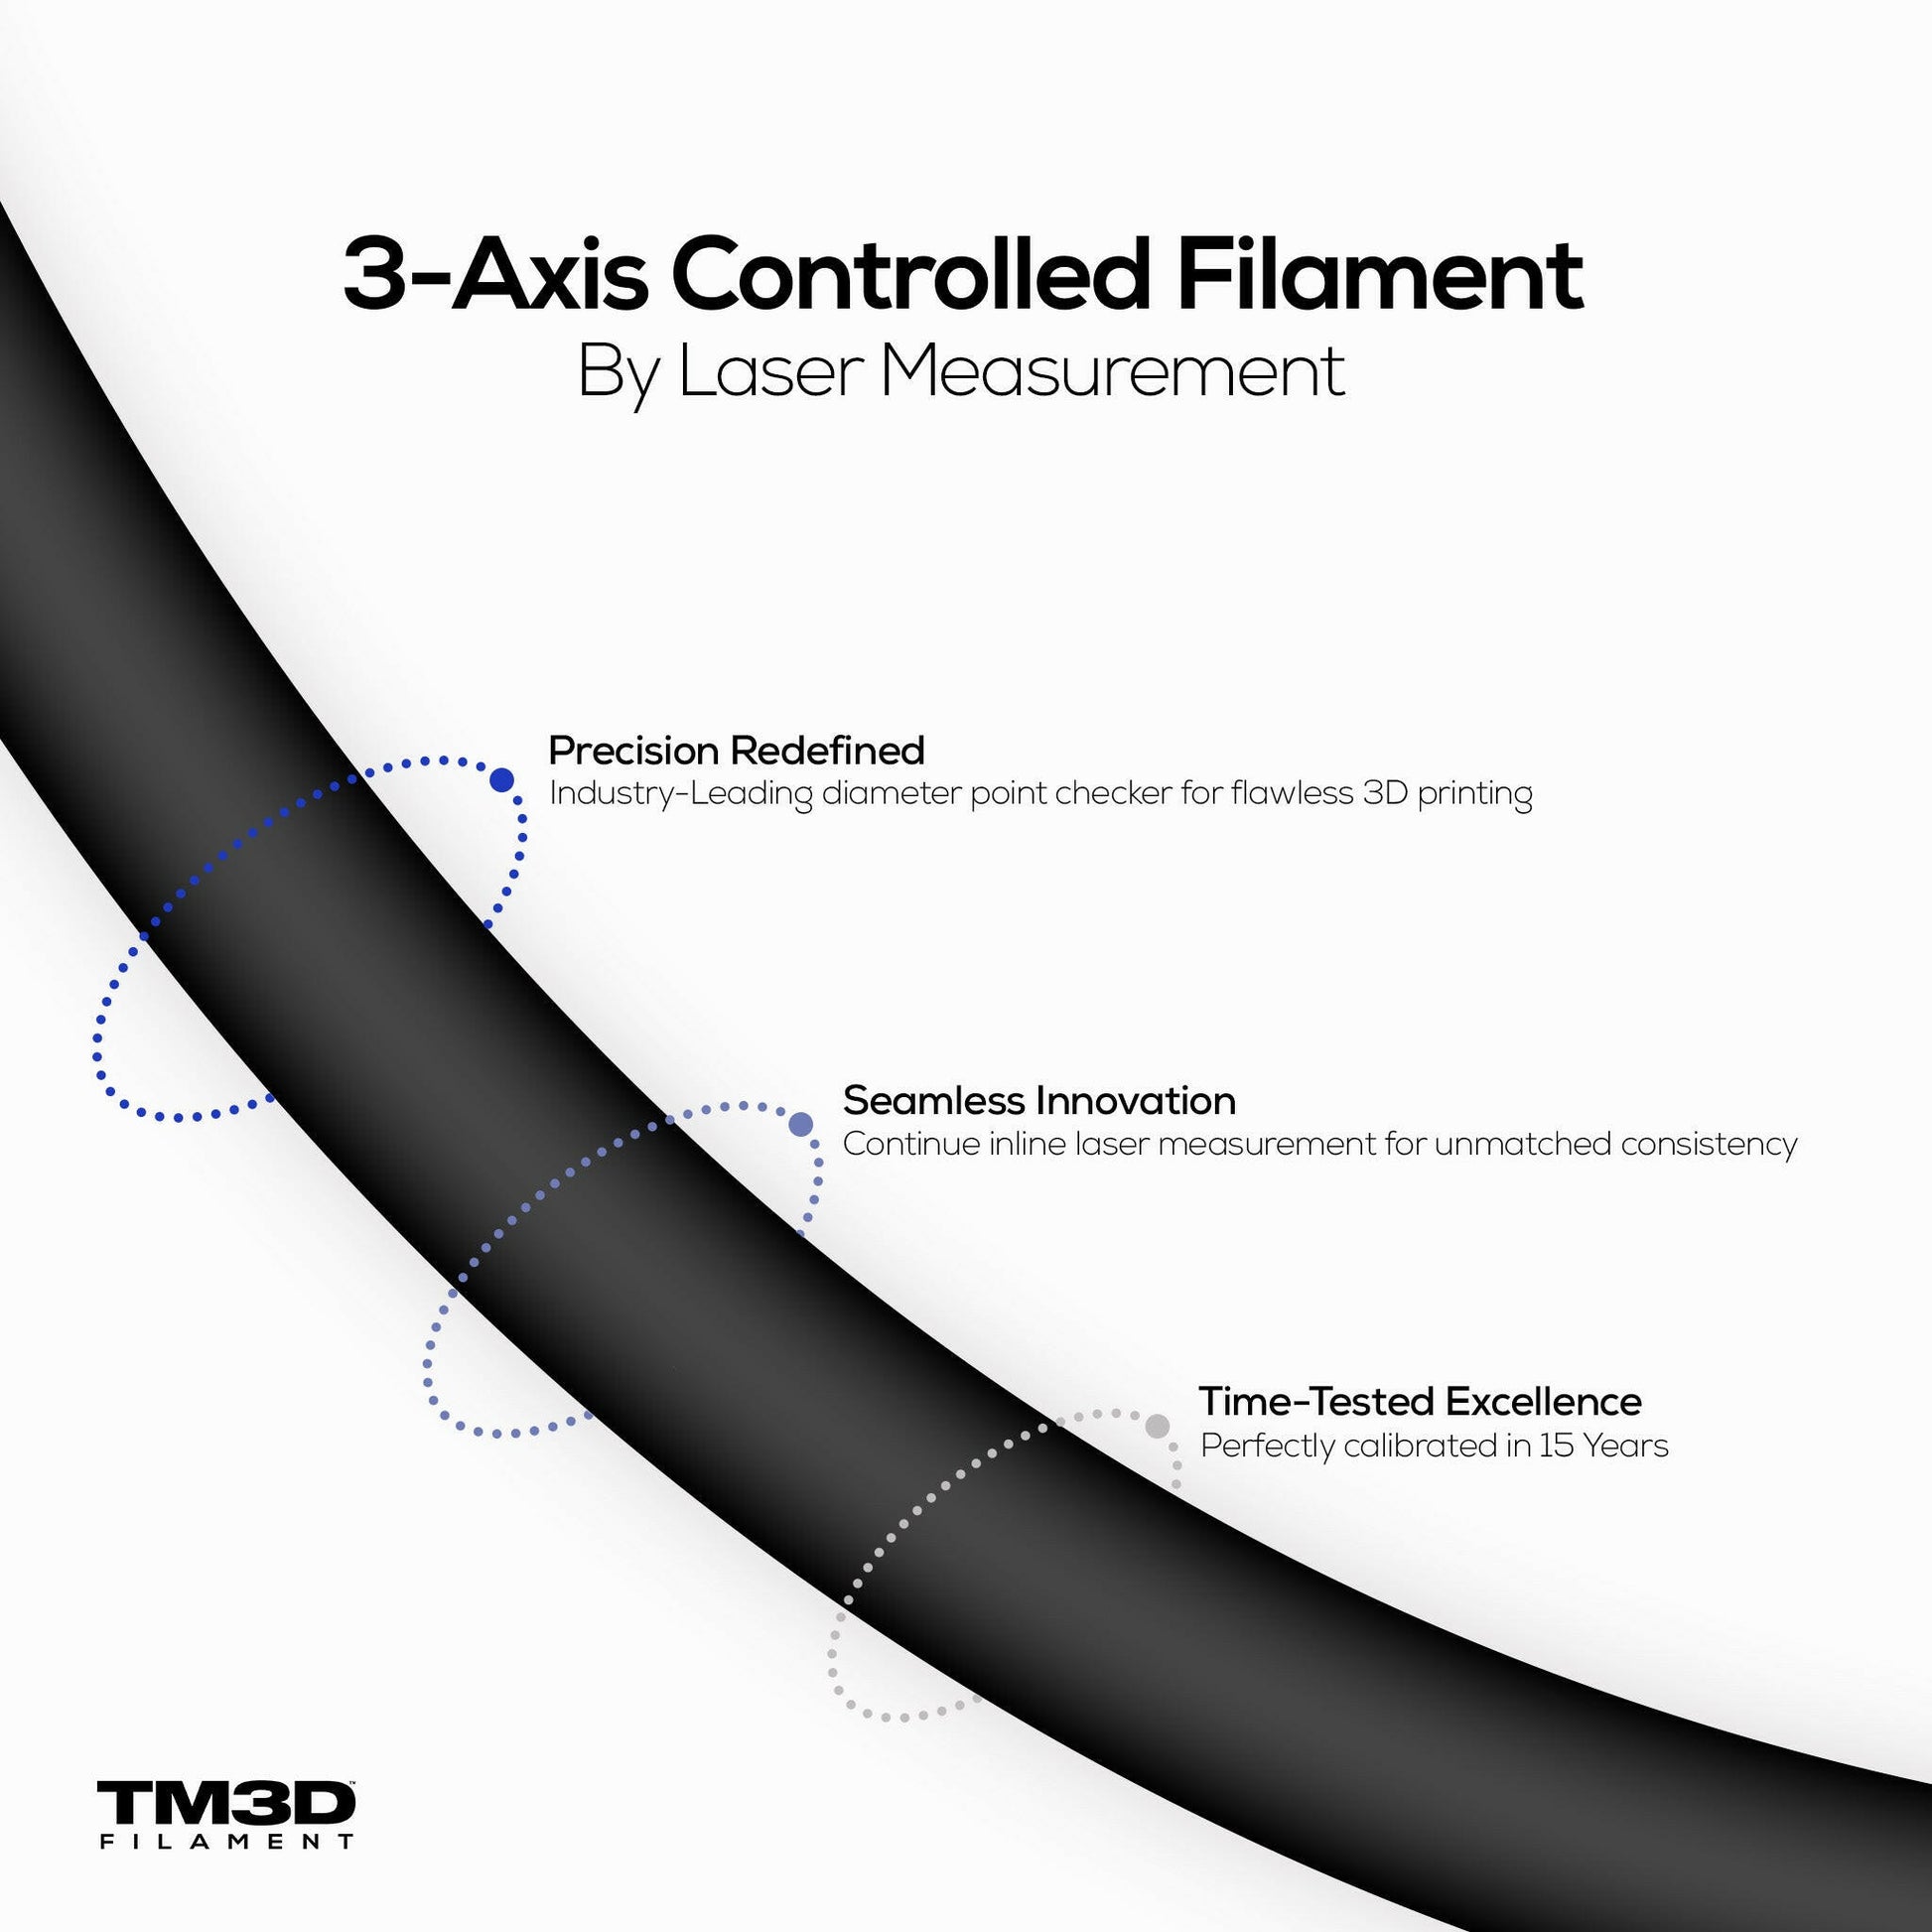 Information image about the filament